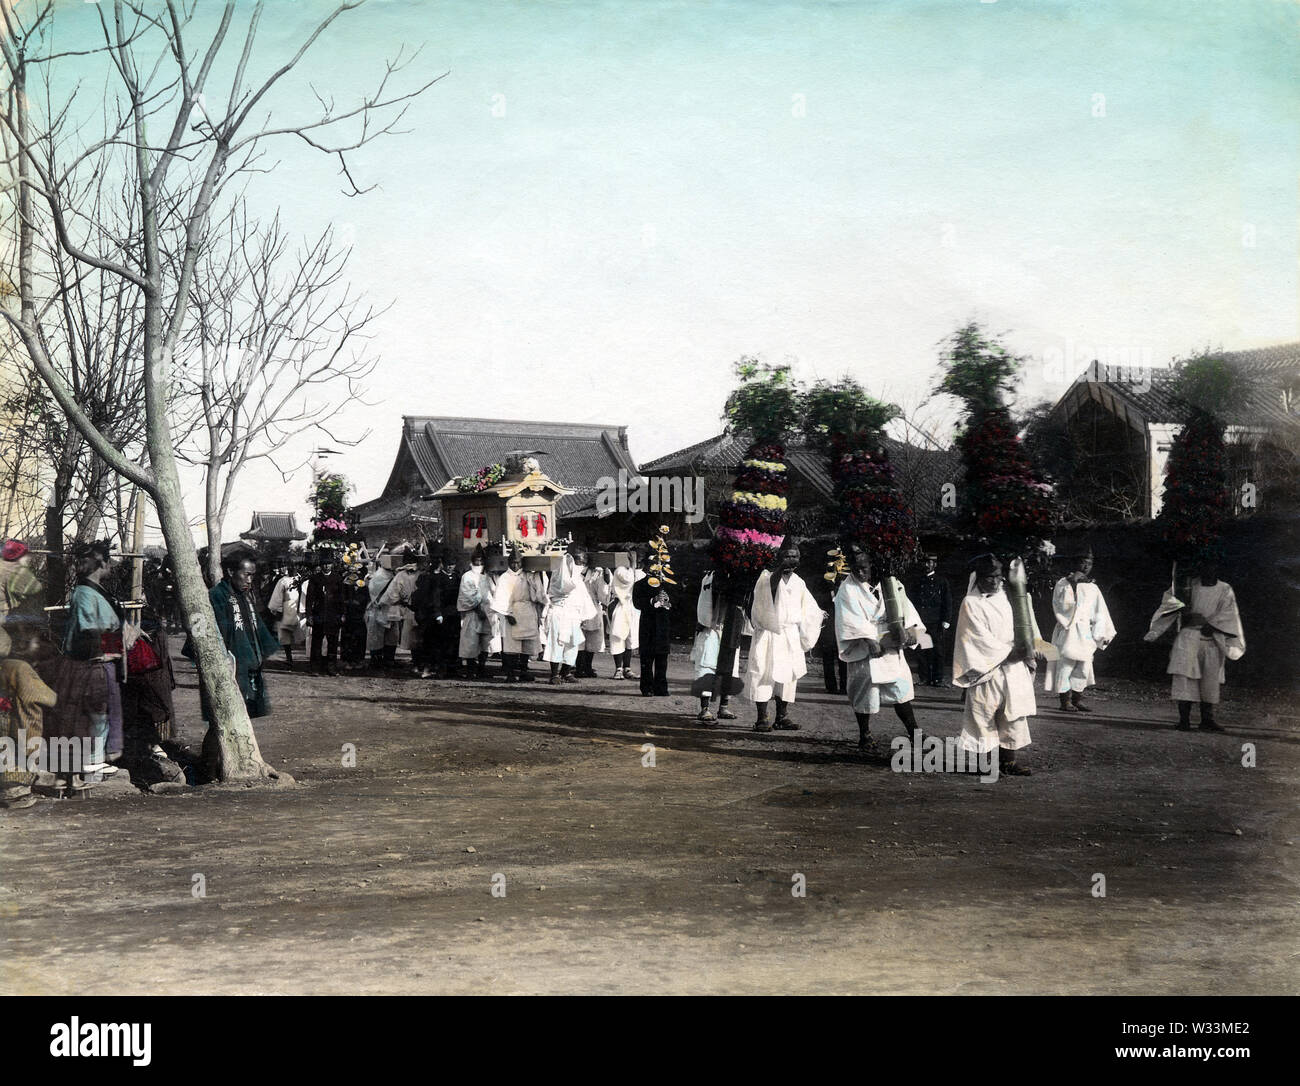 [ 1890s Japan - Japanese Funeral Procession ] —   Funeral procession on the street.  19th century vintage albumen photograph. Stock Photo